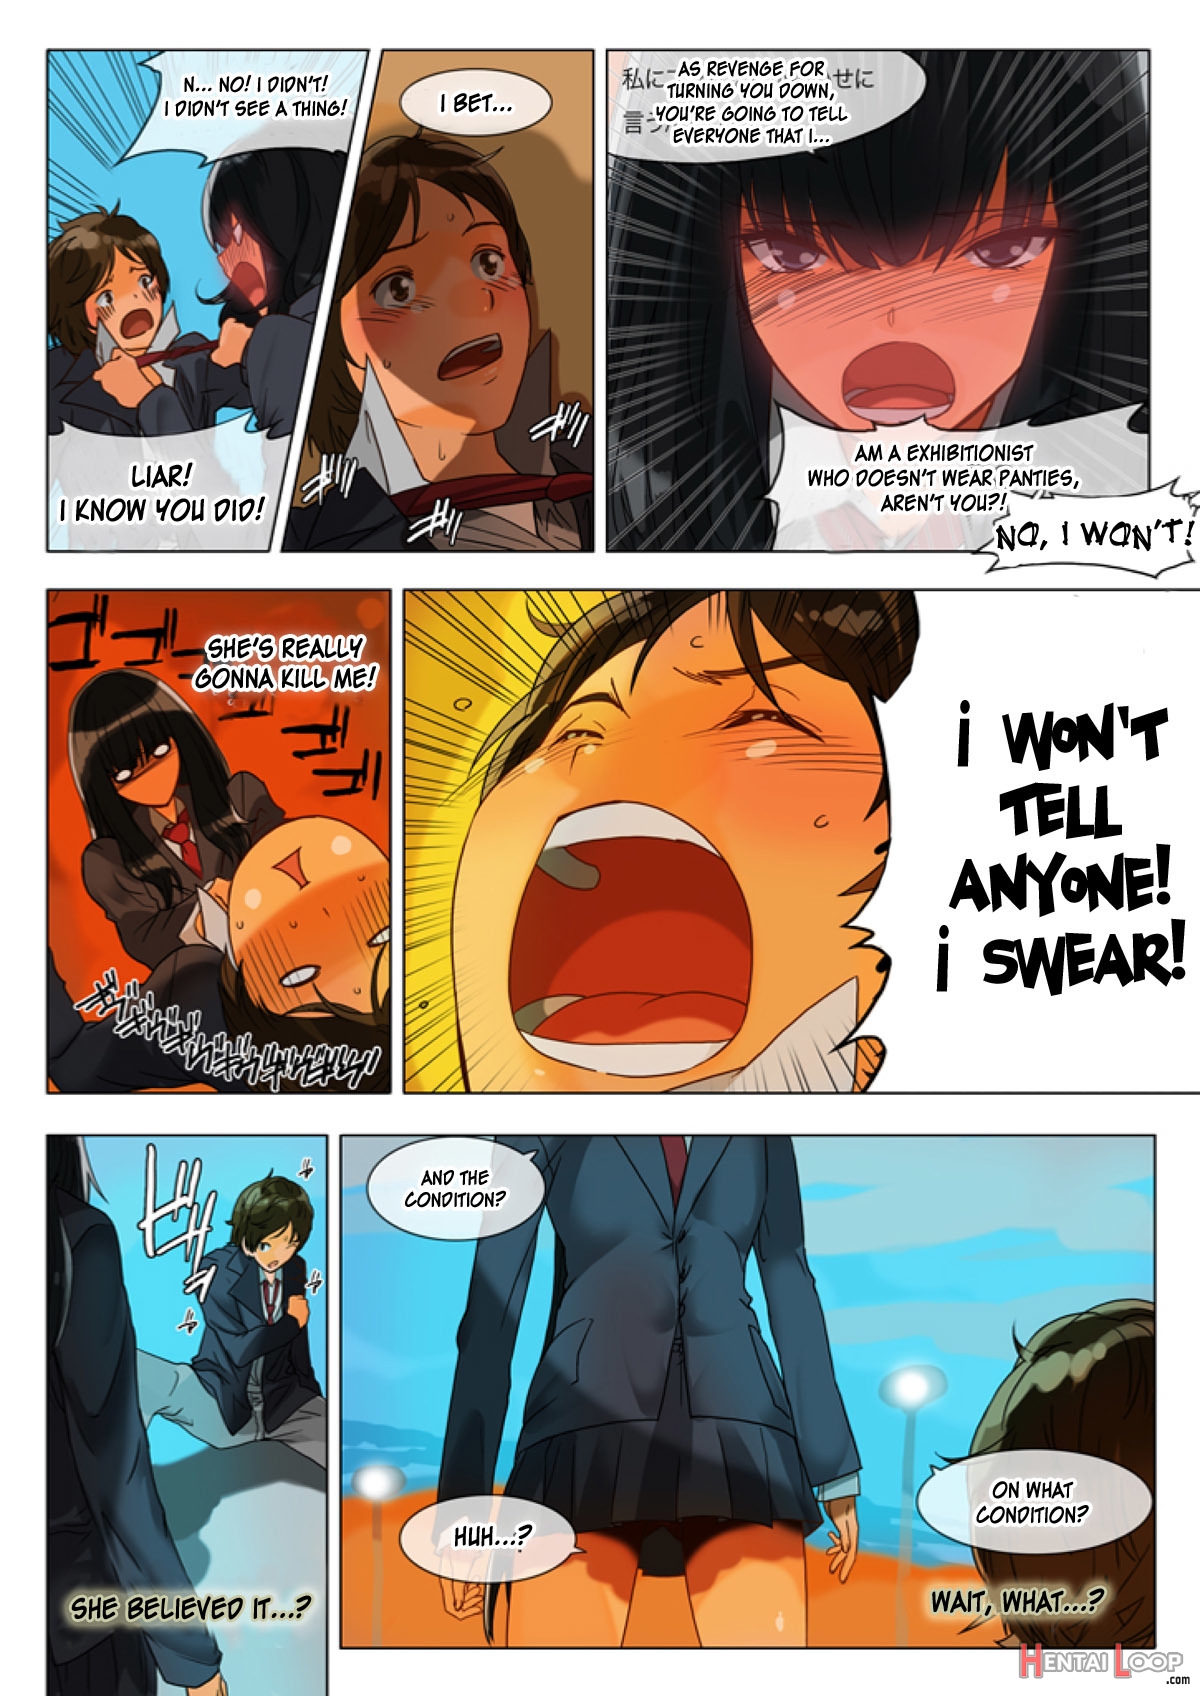 No Panty Girl Episode 1 page 9